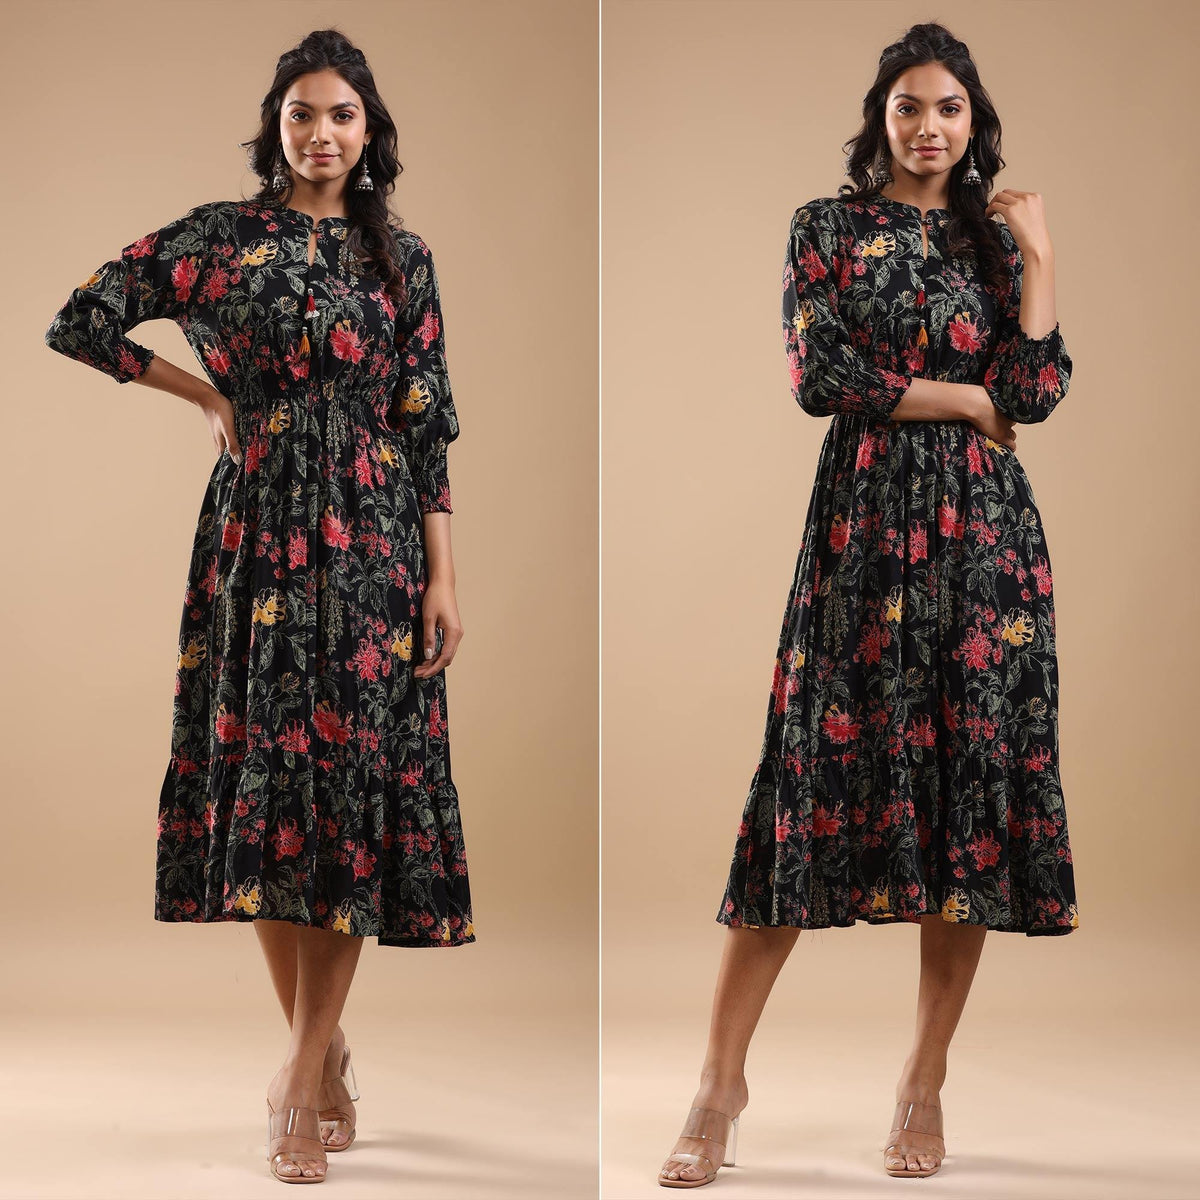 Black Floral Printed Readymade Gown In Cotton 258GW02